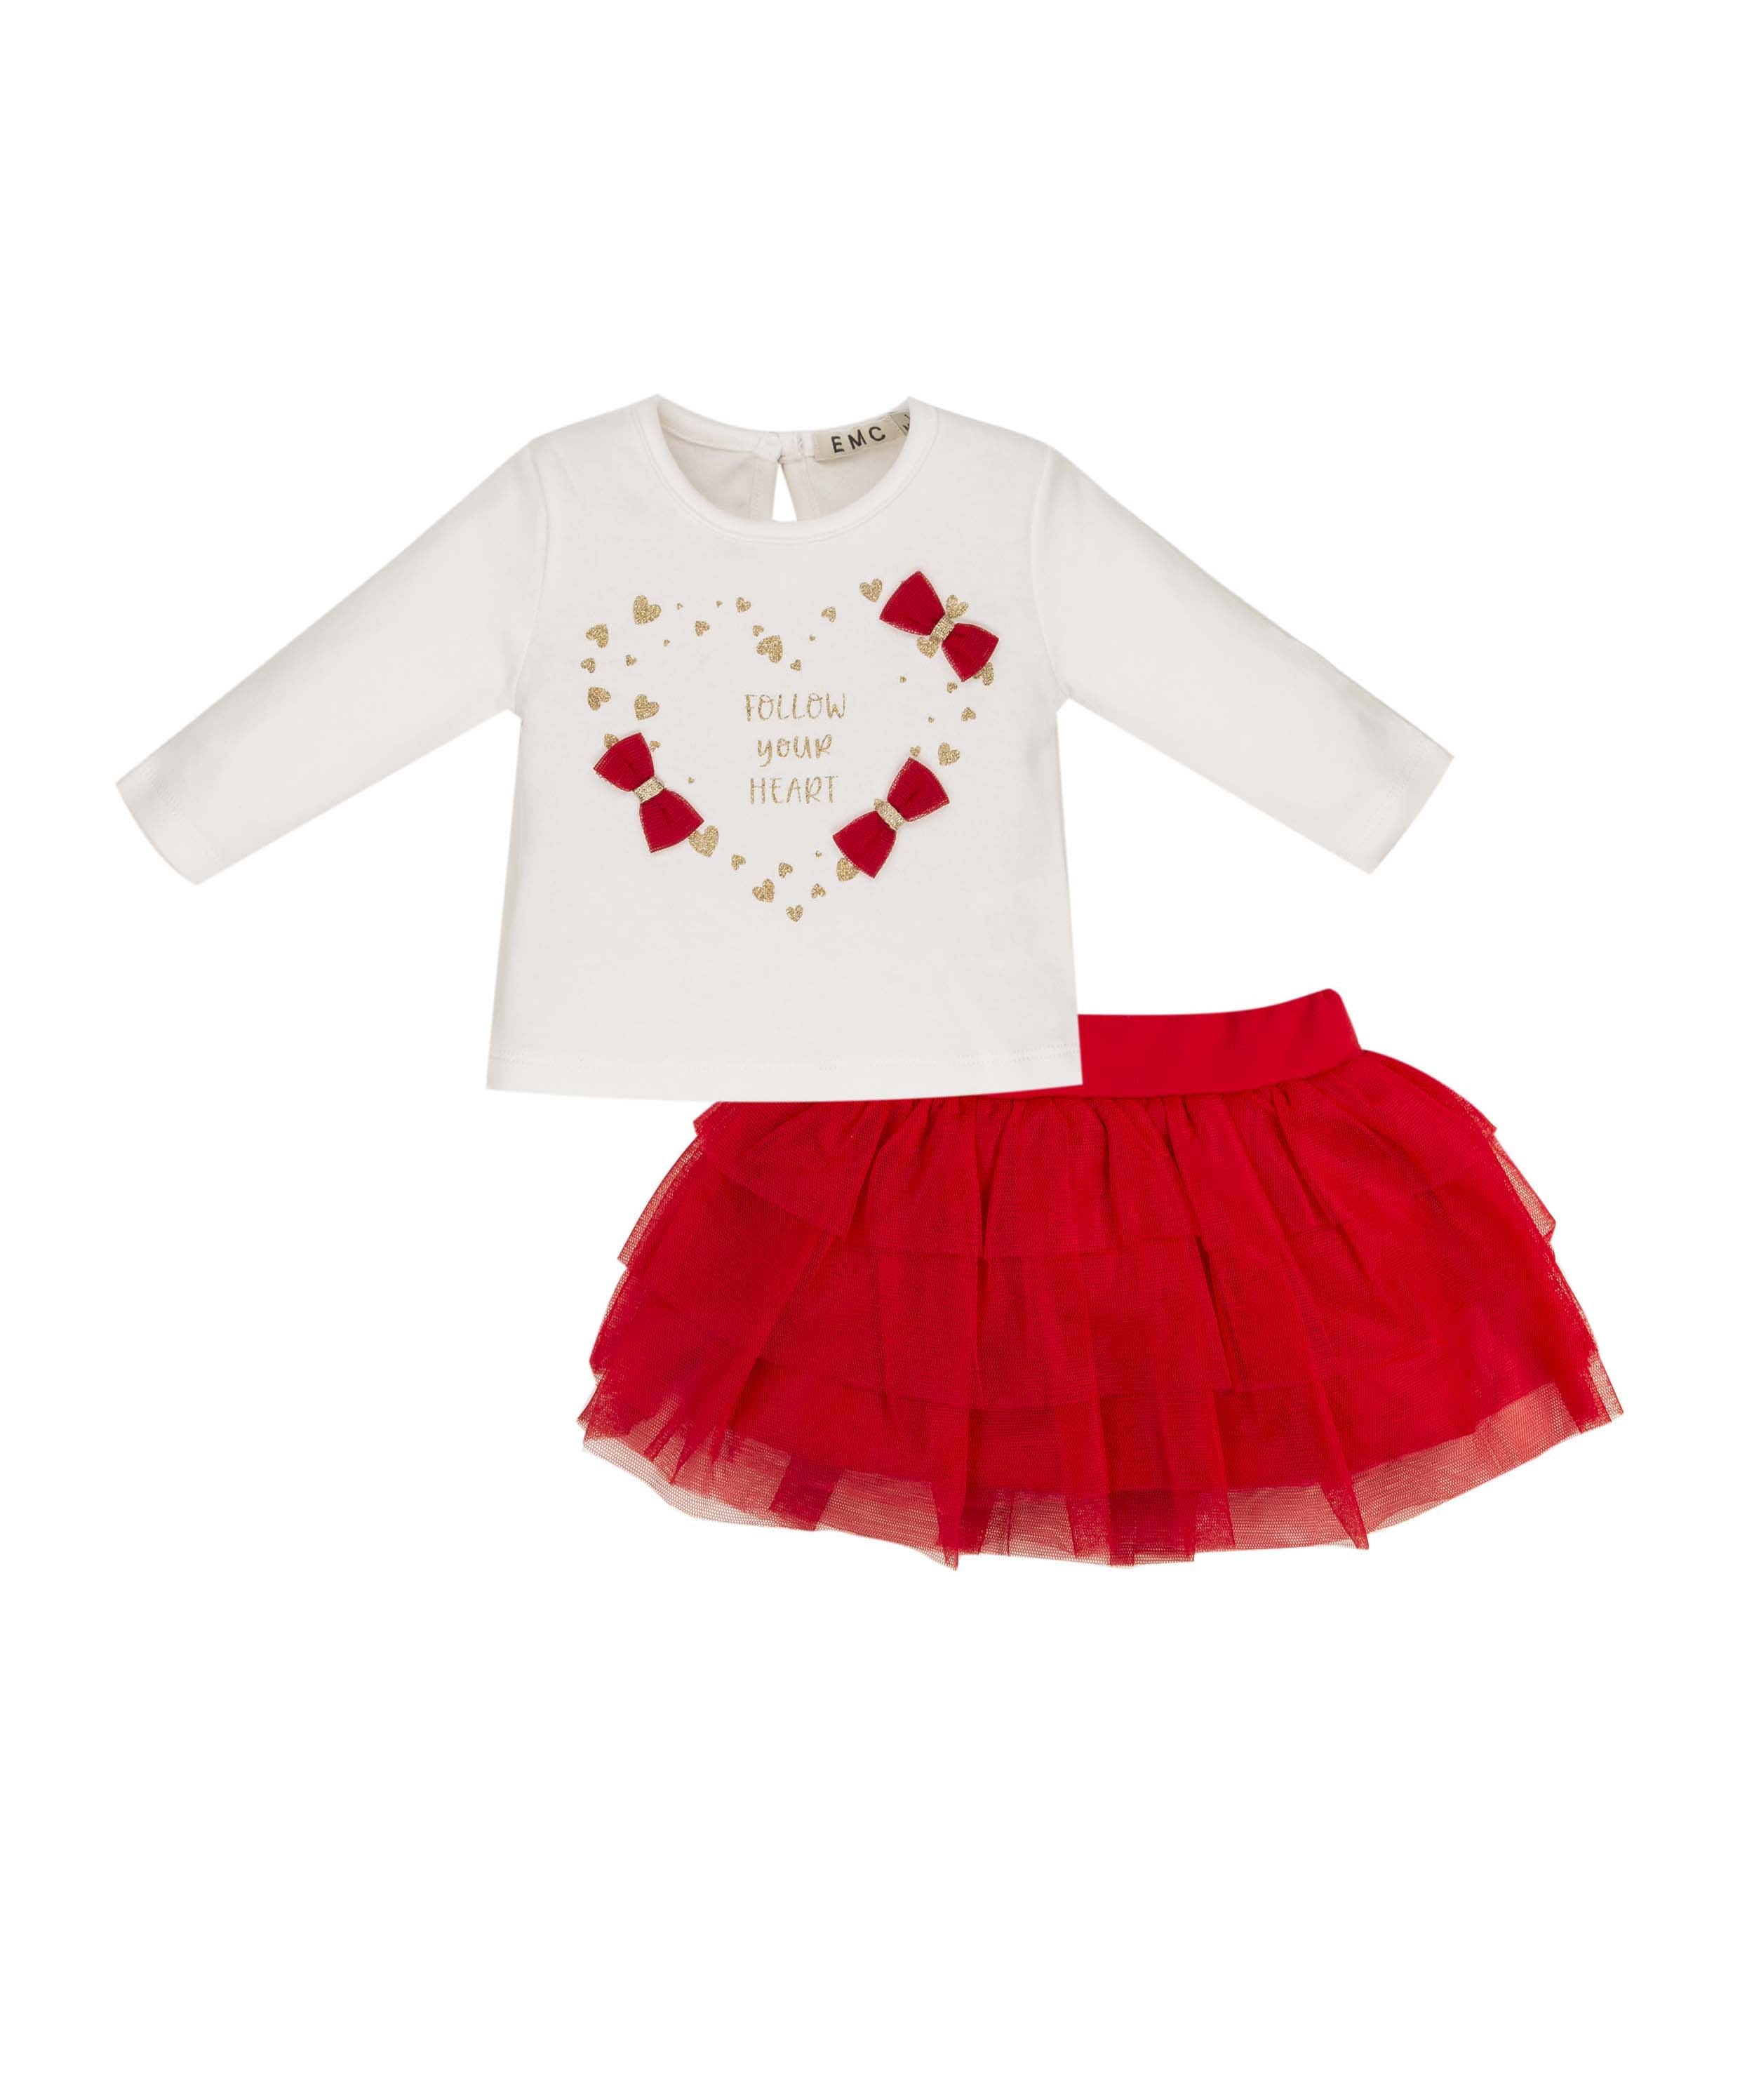 EMC Follow Your Heart Top with Red Tutu Skirt CO3068